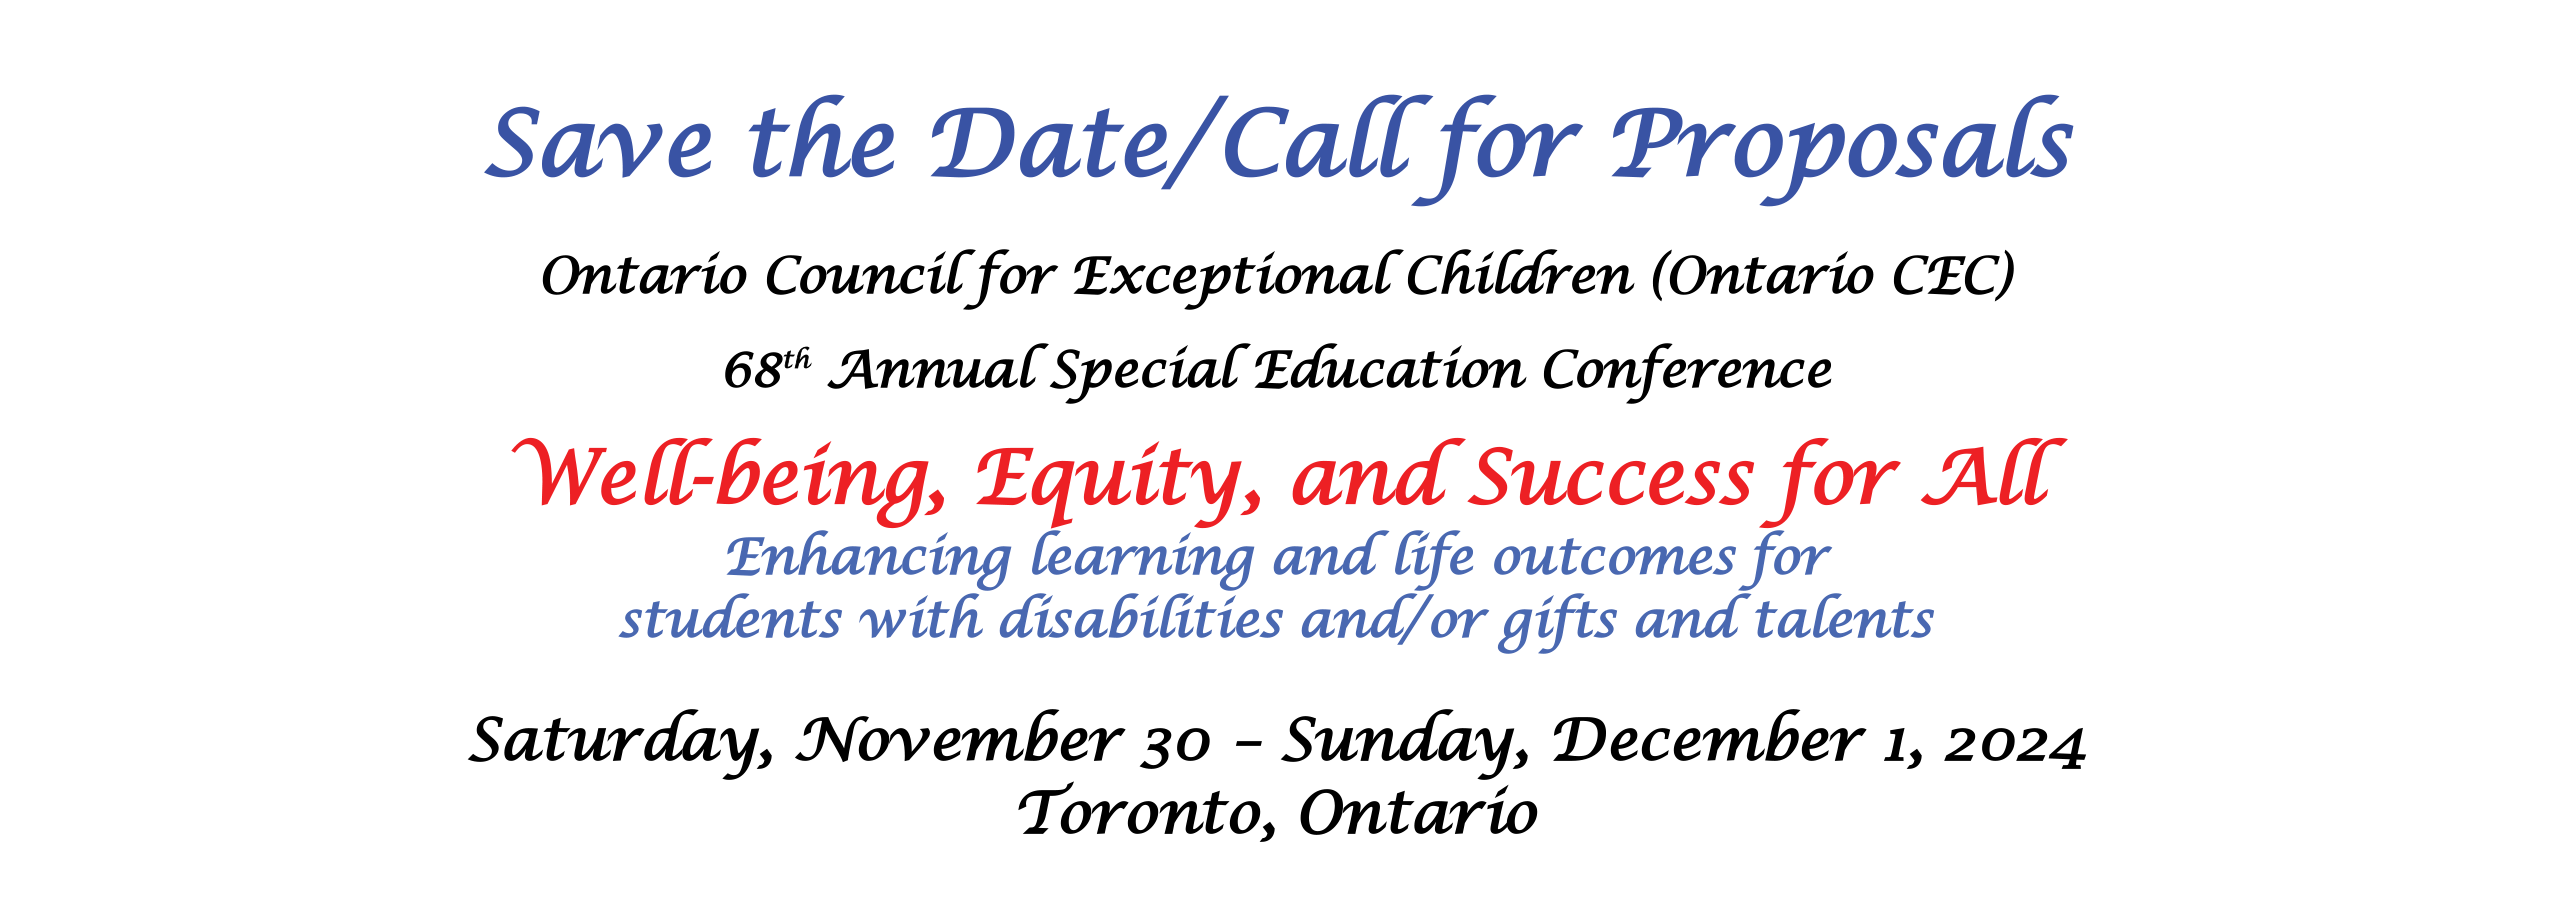 CEC Ontatio Save the Date Call for Proposals